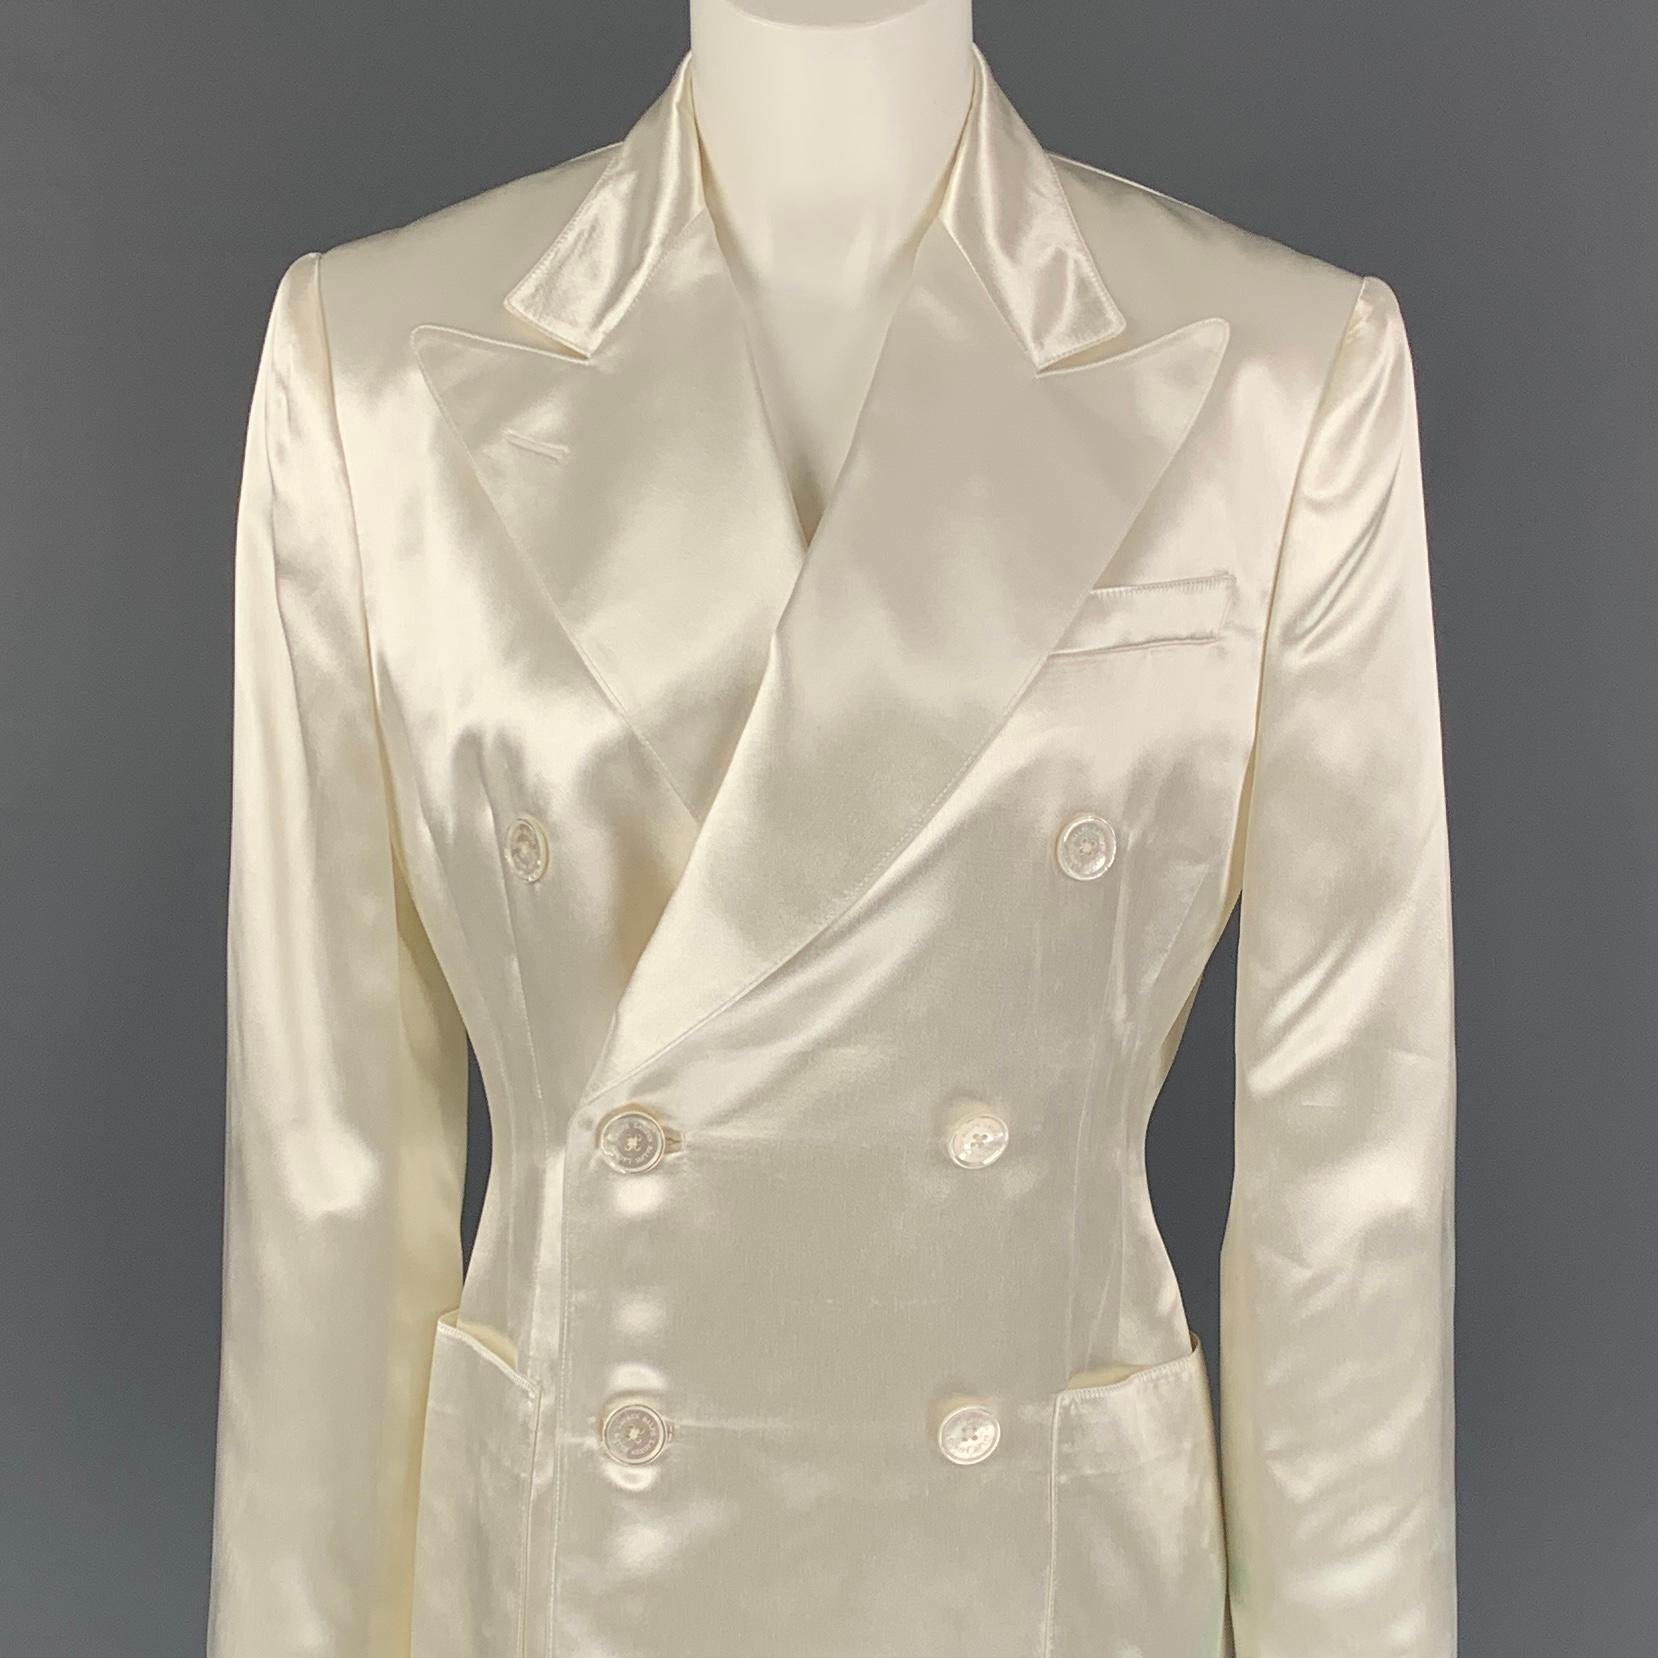 RALPH LAUREN 'Purple Label' blazer comes in a cream acetate with a full liner featuring a peak lapel, patch pockets, and a double breasted closure. Made in USA. 

Very Good Pre-Owned Condition.
Marked: 6

Measurements:

Shoulder: 16 in.
Bust: 36